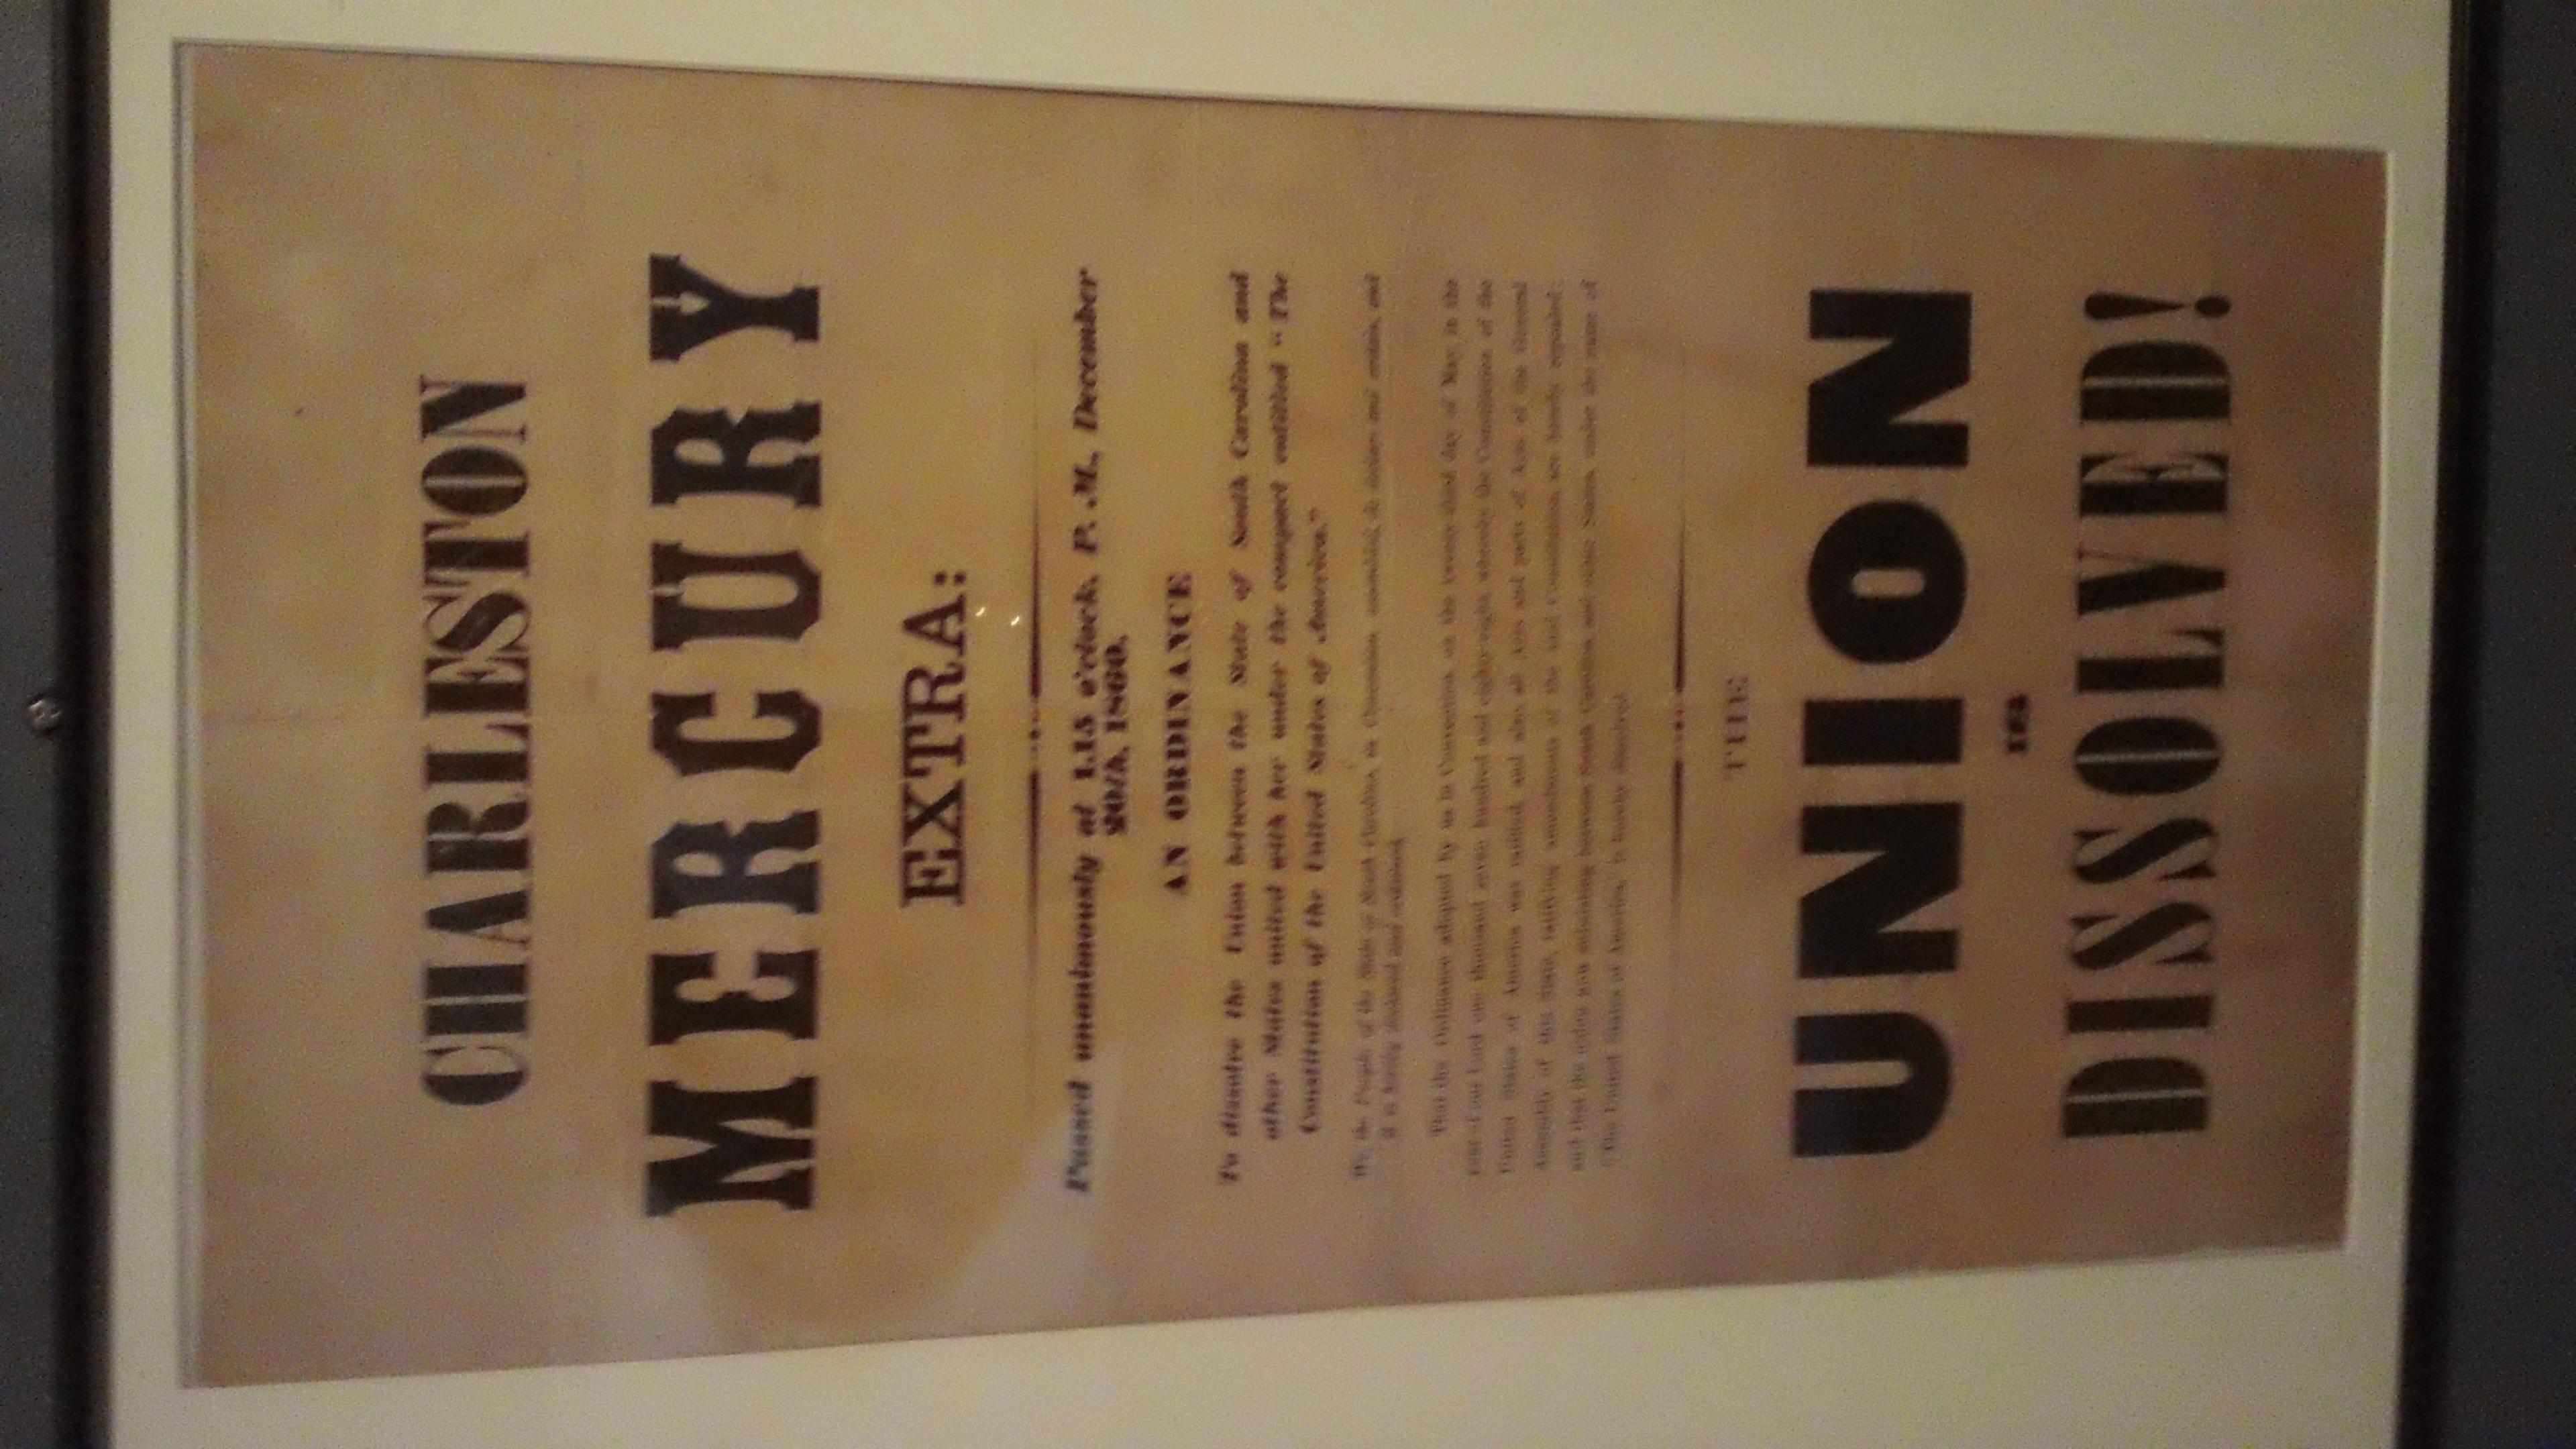  The Museum of the Confederacy has a famous broadside from the Charleston Mercury newspaper after the fall of Fort Sumter.&nbsp; 